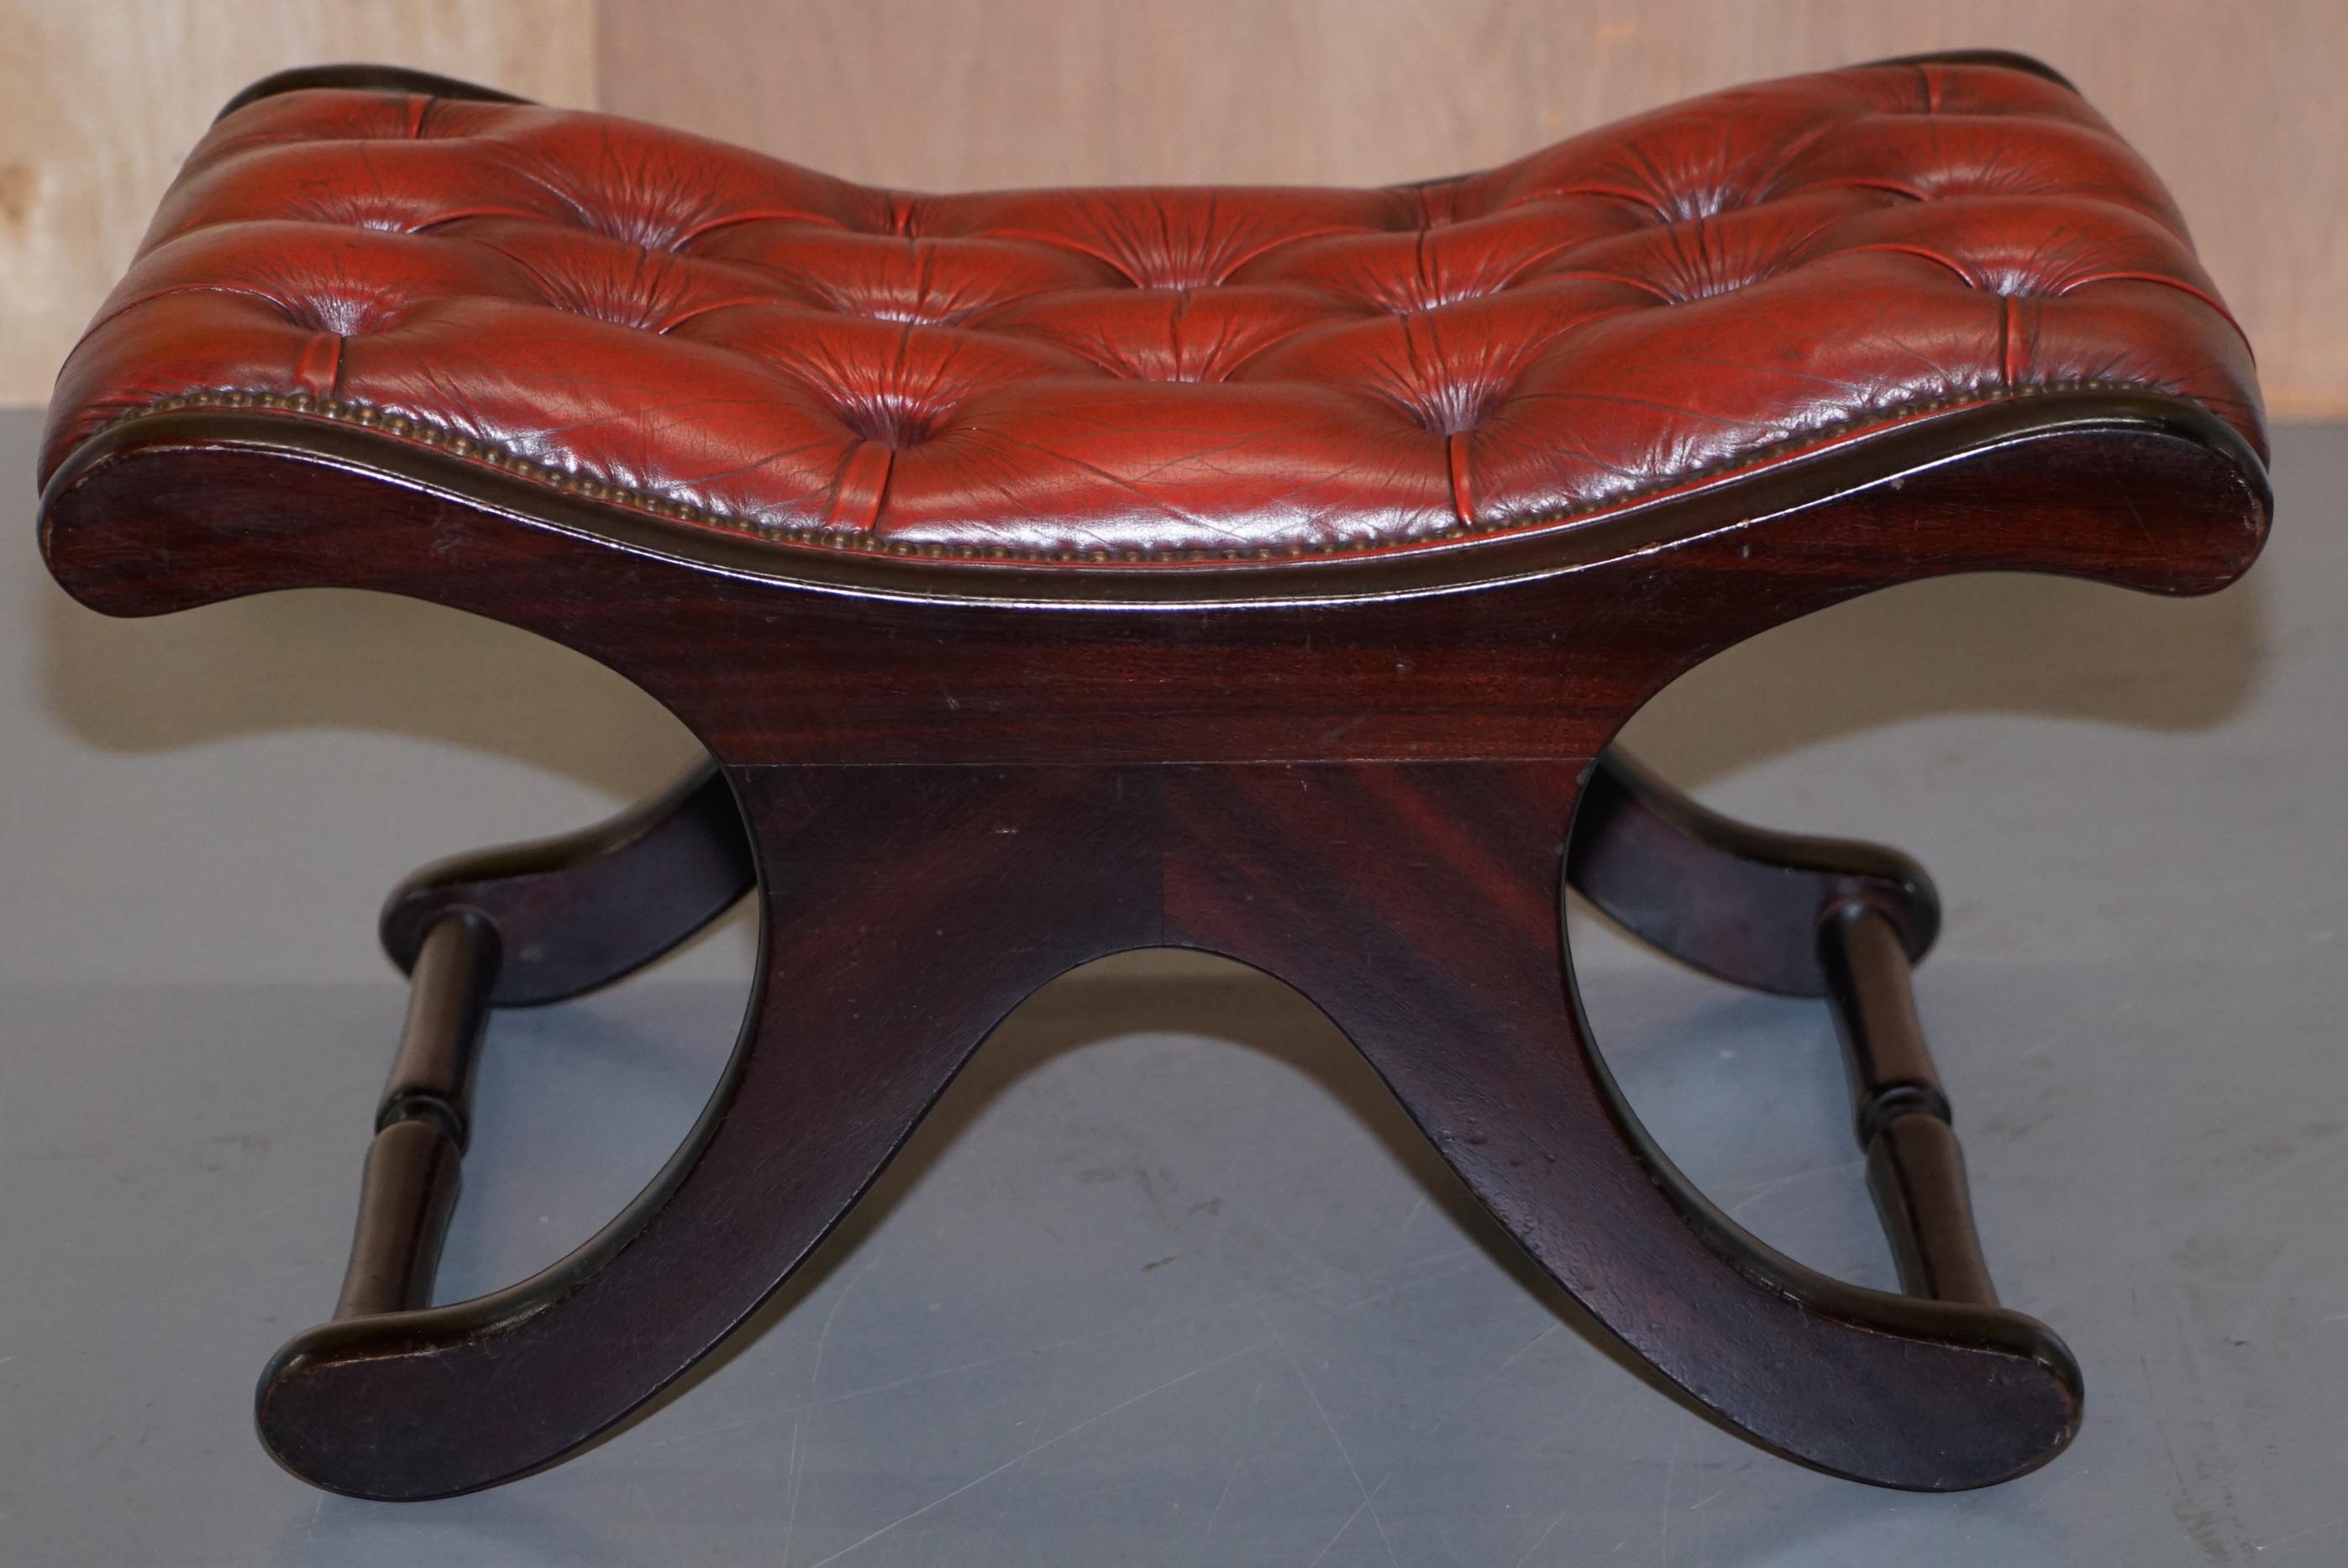 Hand-Crafted Lovely Chesterfield Oxblood Leather & Mahogany Curved Footstool Footrest Stool